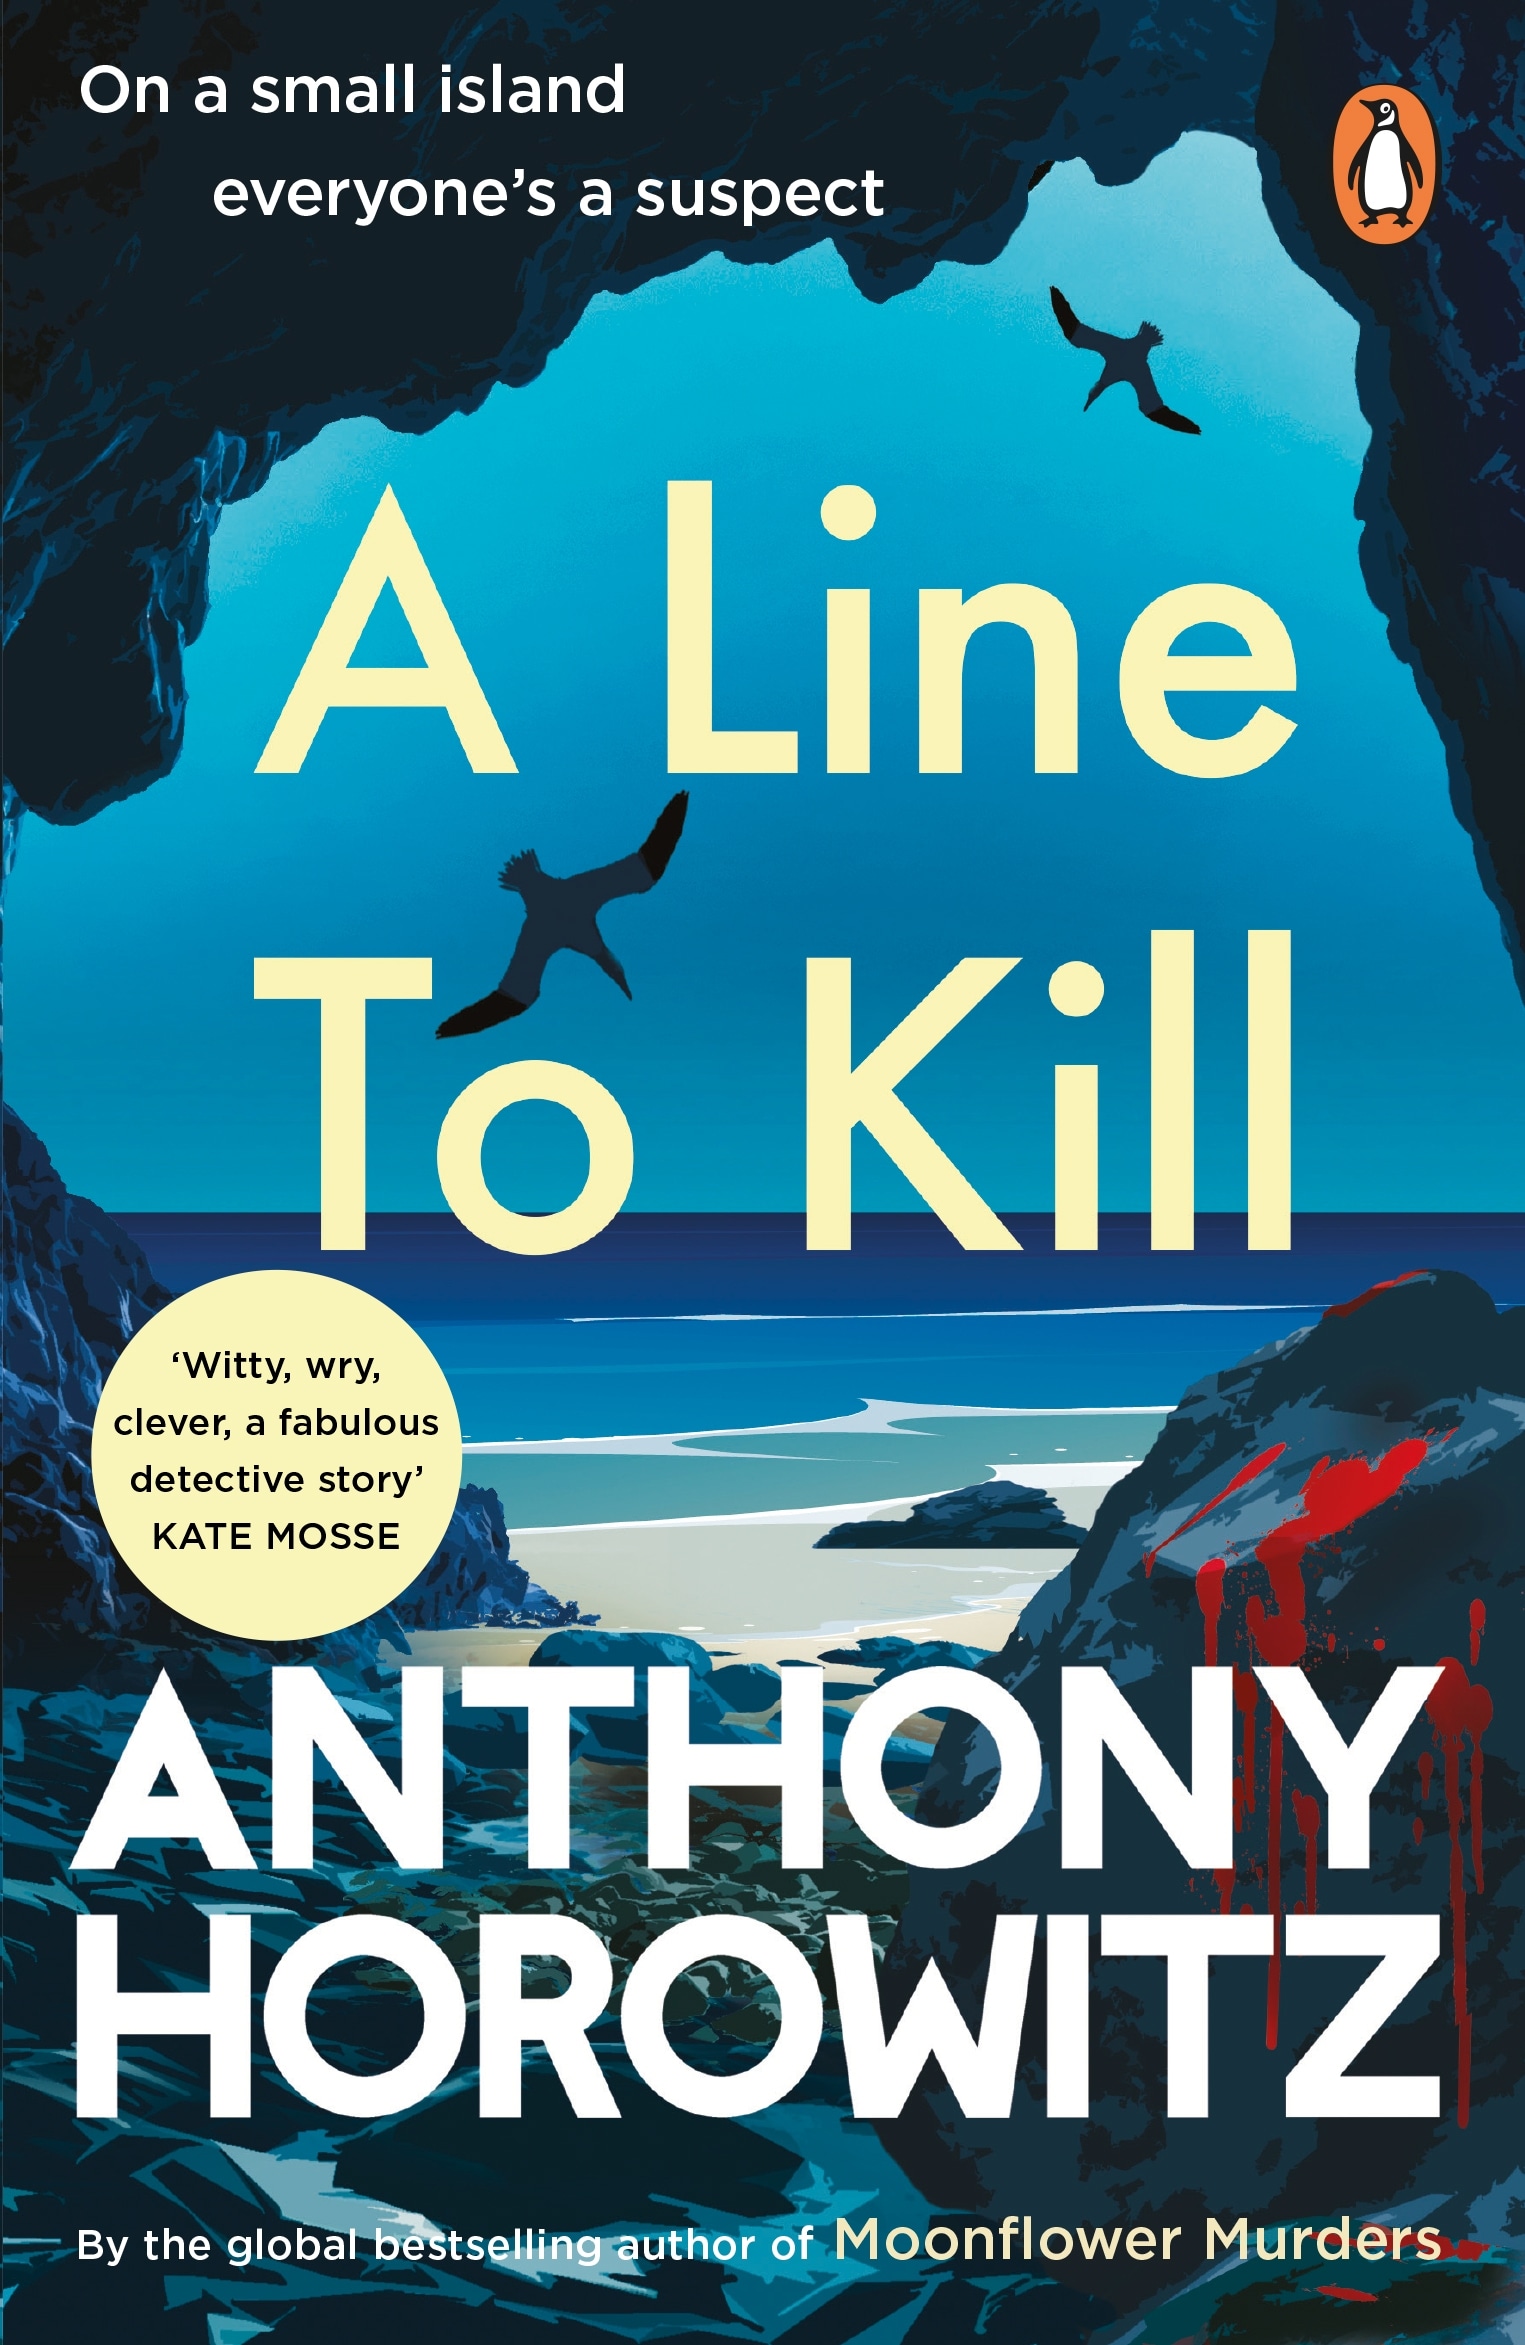 Book “A Line to Kill” by Anthony Horowitz — March 17, 2022